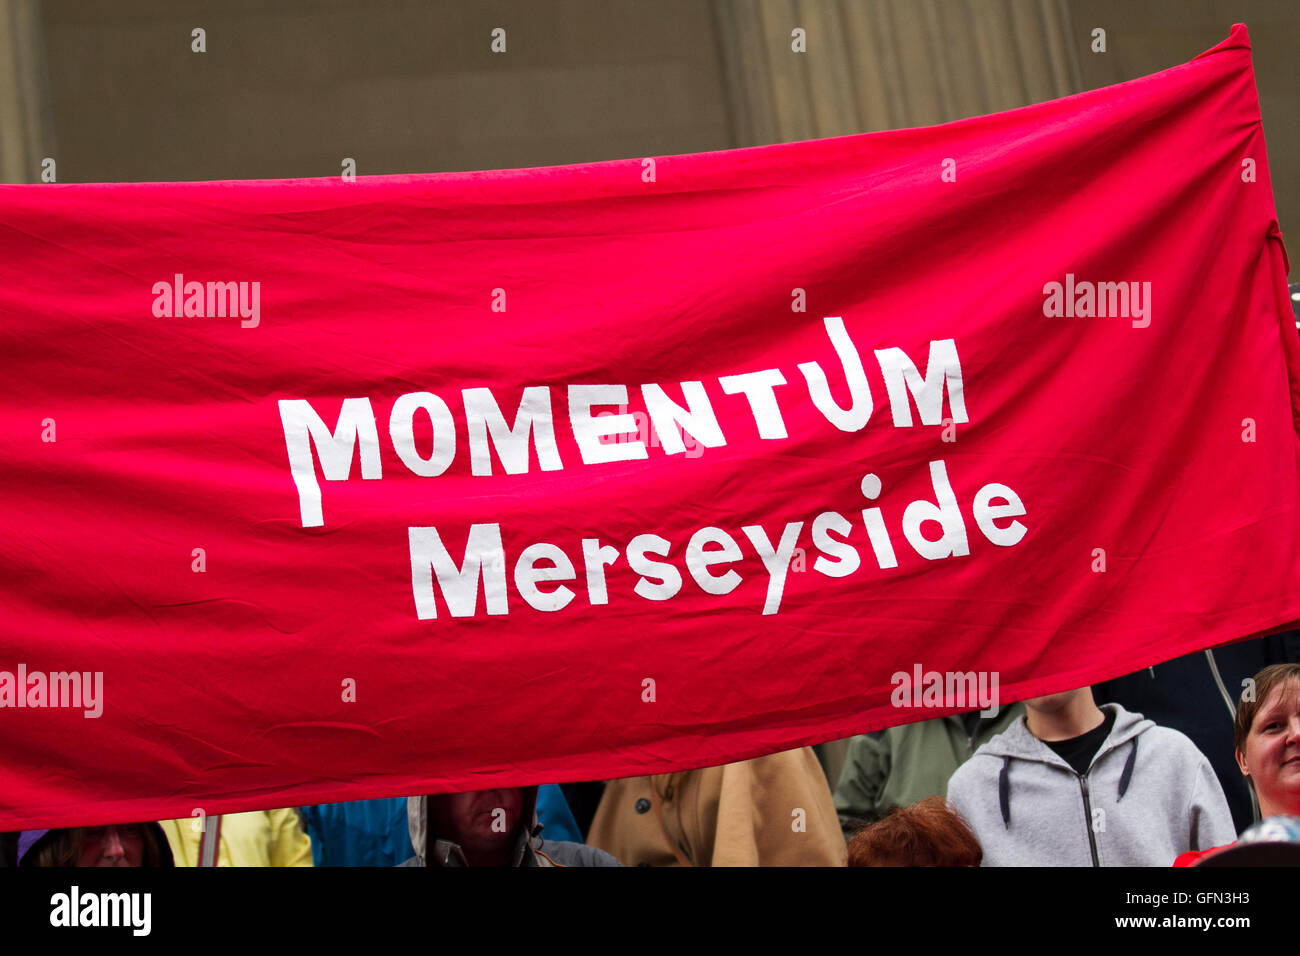 Liverpool, Merseyside, UK. 1st August 2016. Jeremy Corbyn addresses rally.  A tired looking Jeremy Corbyn attends a party rally in the Labour heartland of Liverpool, Merseyside.  Only a thousand or so Corbyn supporters sprouting torn cardboard slogans showed up on the steps outside St' Georges Hall.   If these hardcore voters were expecting a statesman to appear, they were sadly disappointed. Credit:  Cernan Elias/Alamy Live News Stock Photo